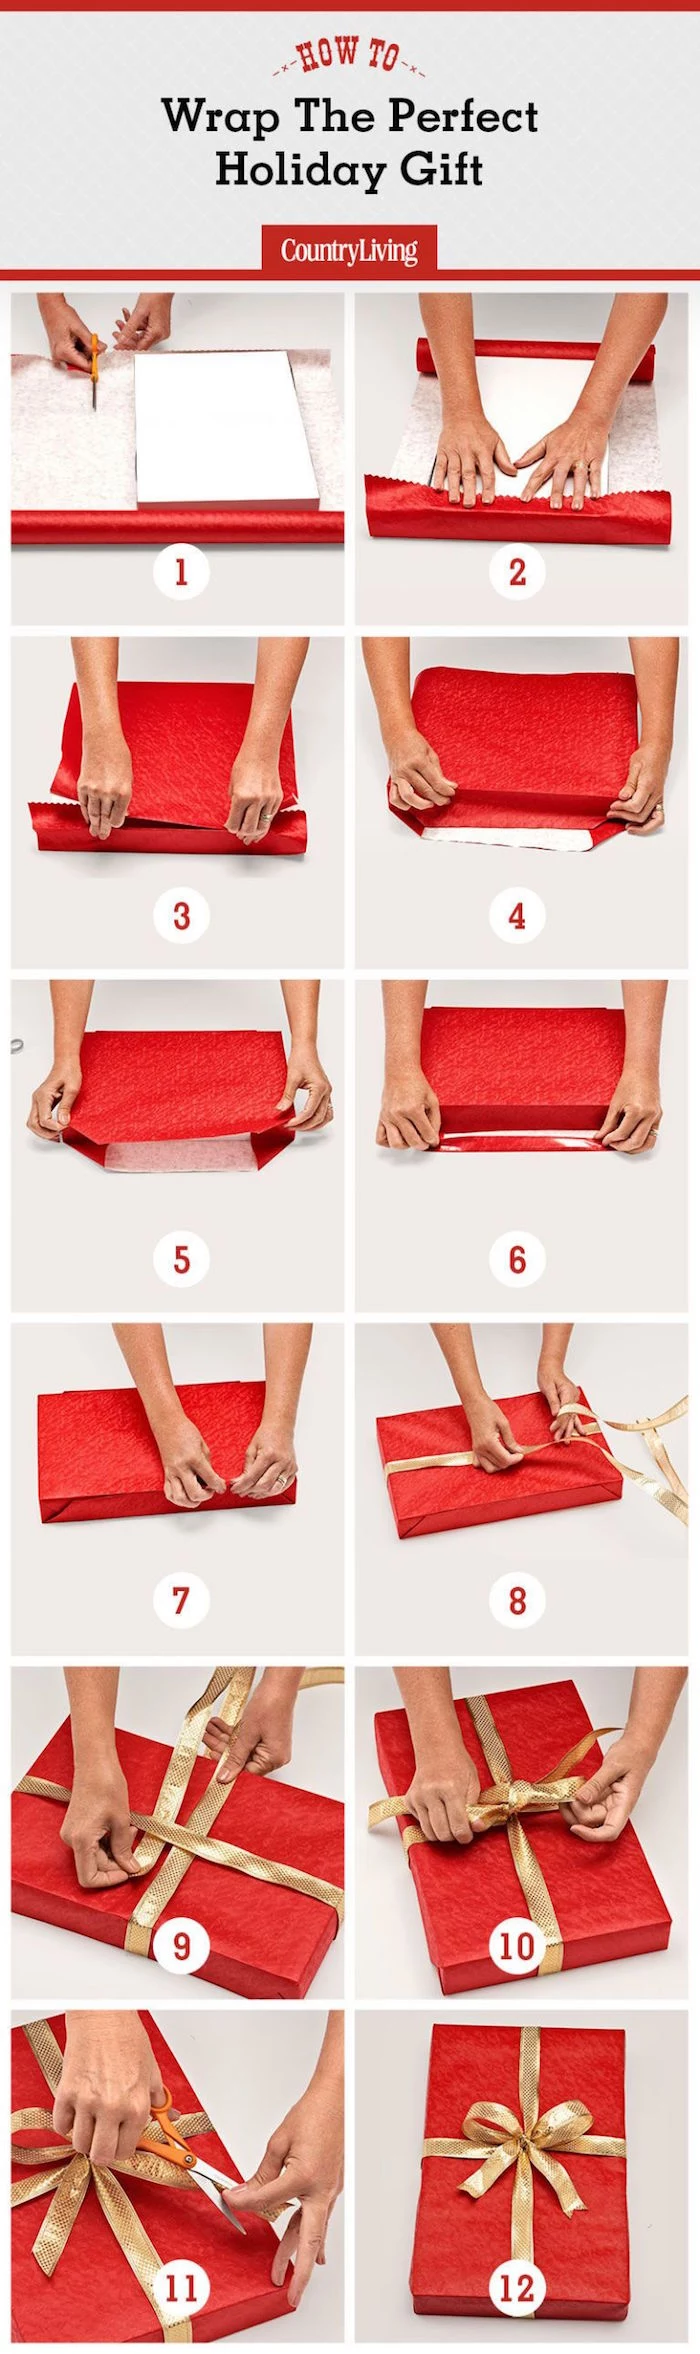 how to wrap a present in twelve steps photo collage of step by step tutorial with red wrapping paper and gold bow